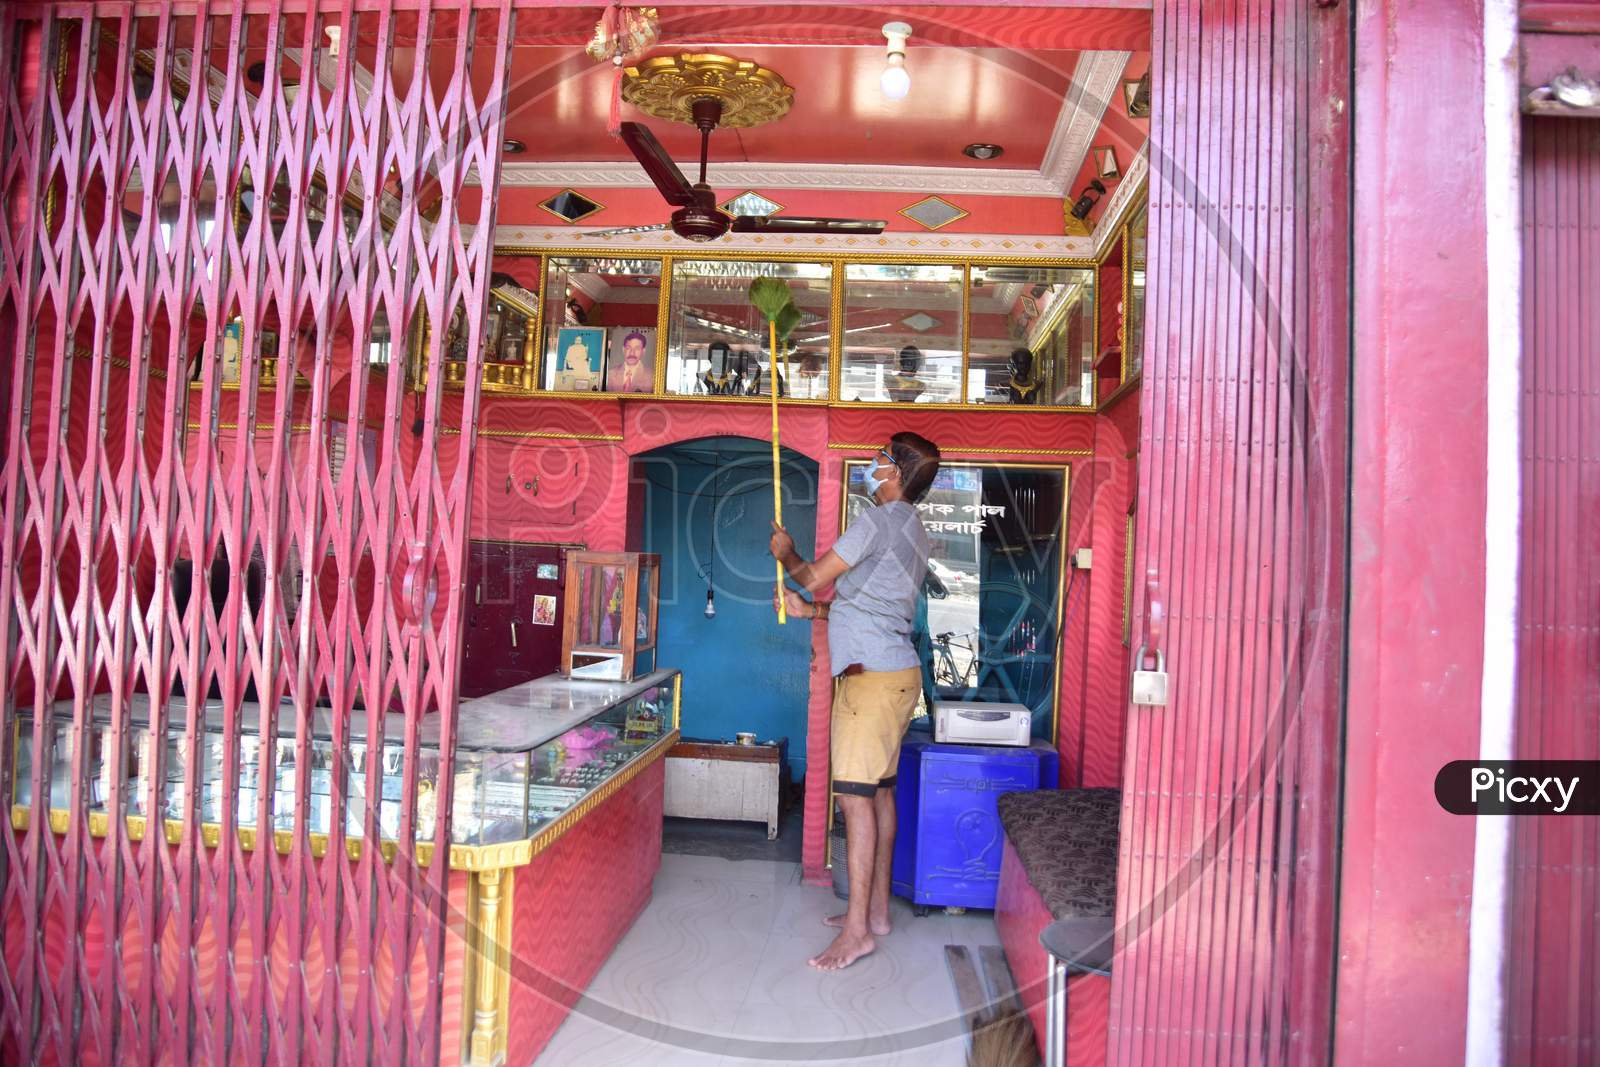 A  Man Cleans His Jewelry Shop  After Authorities Allowed Sale  With Certain Restrictions, During The Ongoing Covid-19 or Coronavirus  Nationwide Lockdown In Nagaon District Of Assam On May 04,2020 .